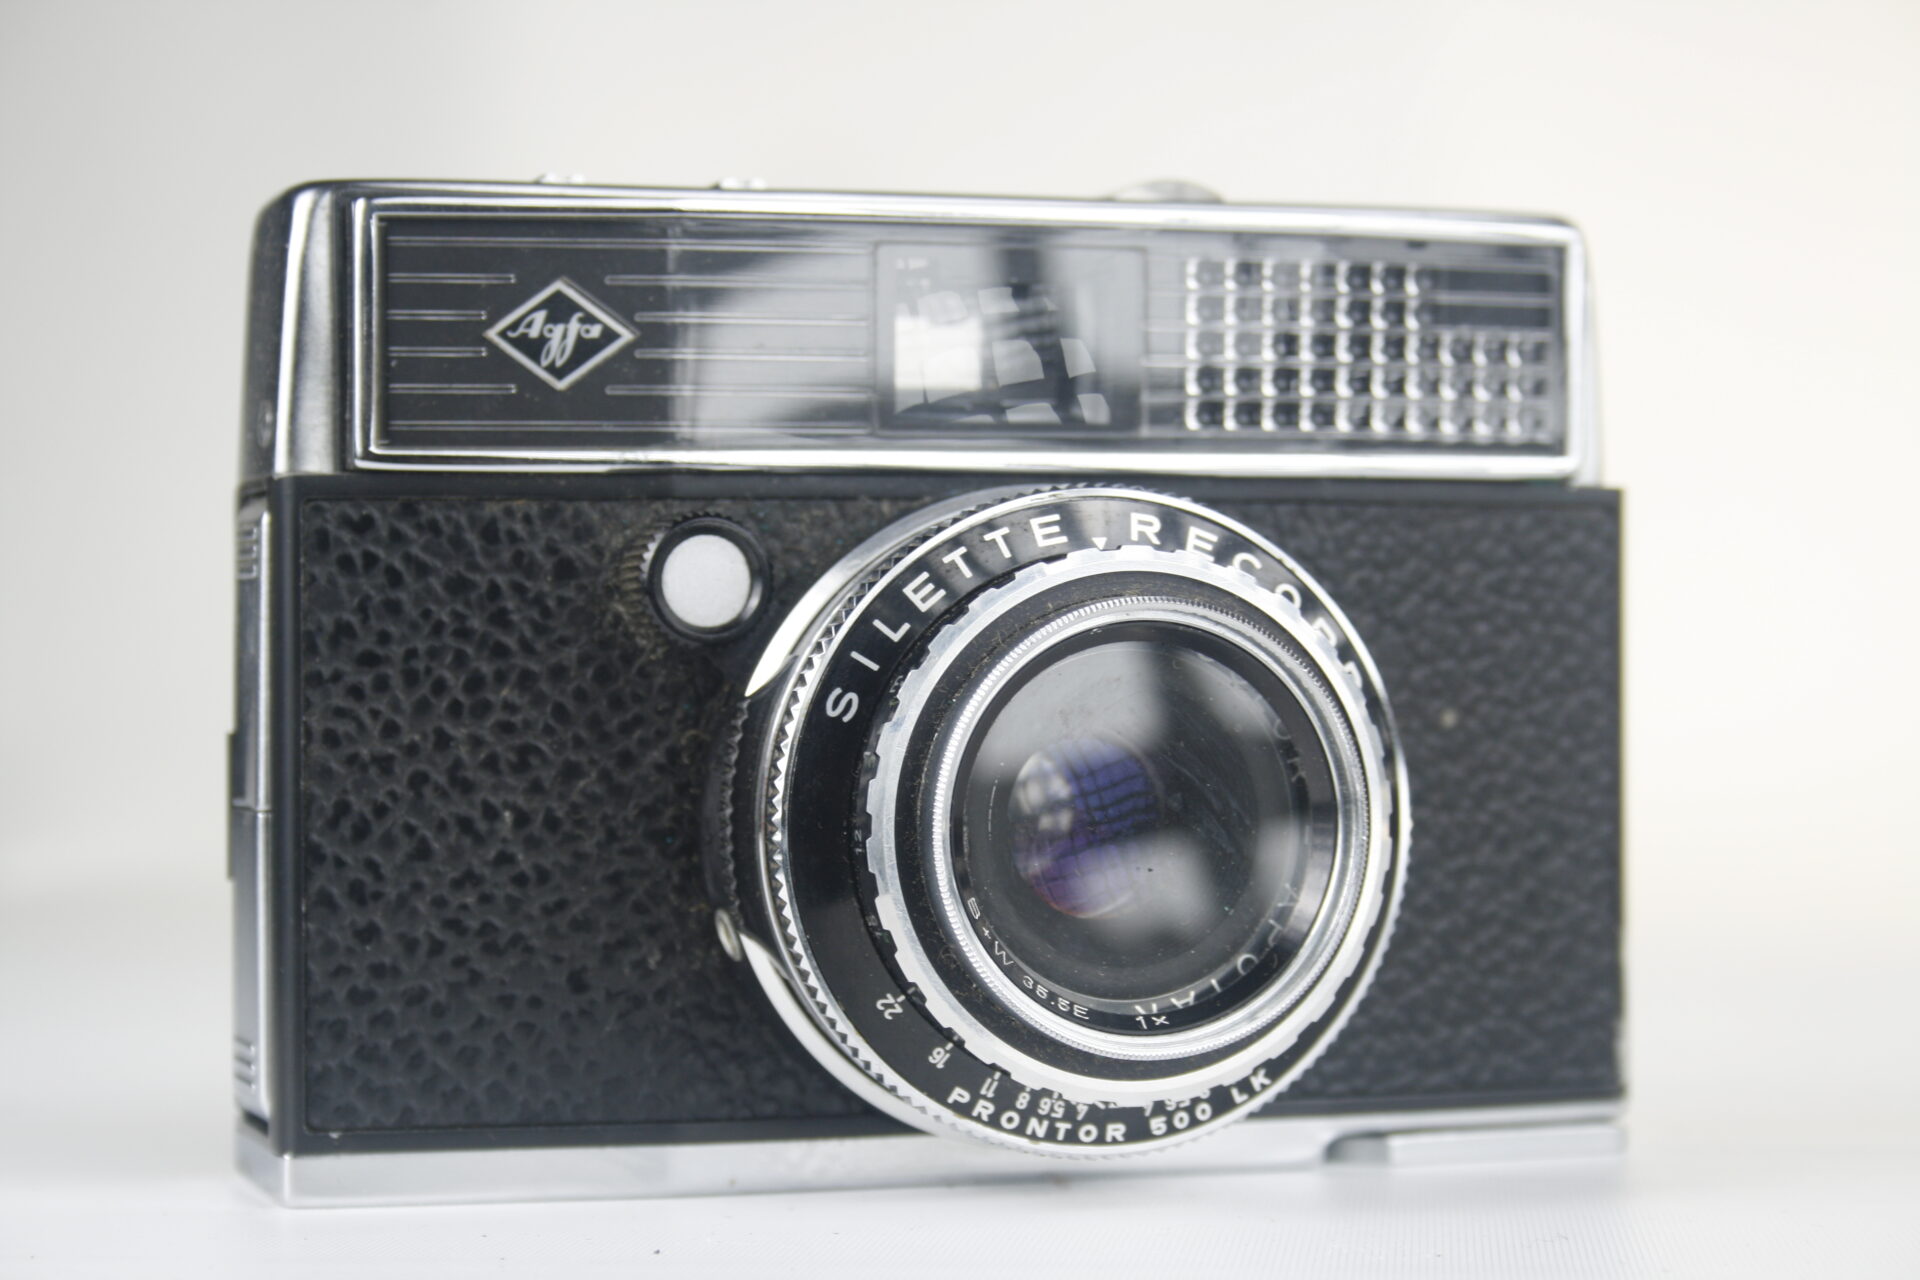 Agfa Silette Record. 35mm viewfinder camera. 1963. Duitsland.